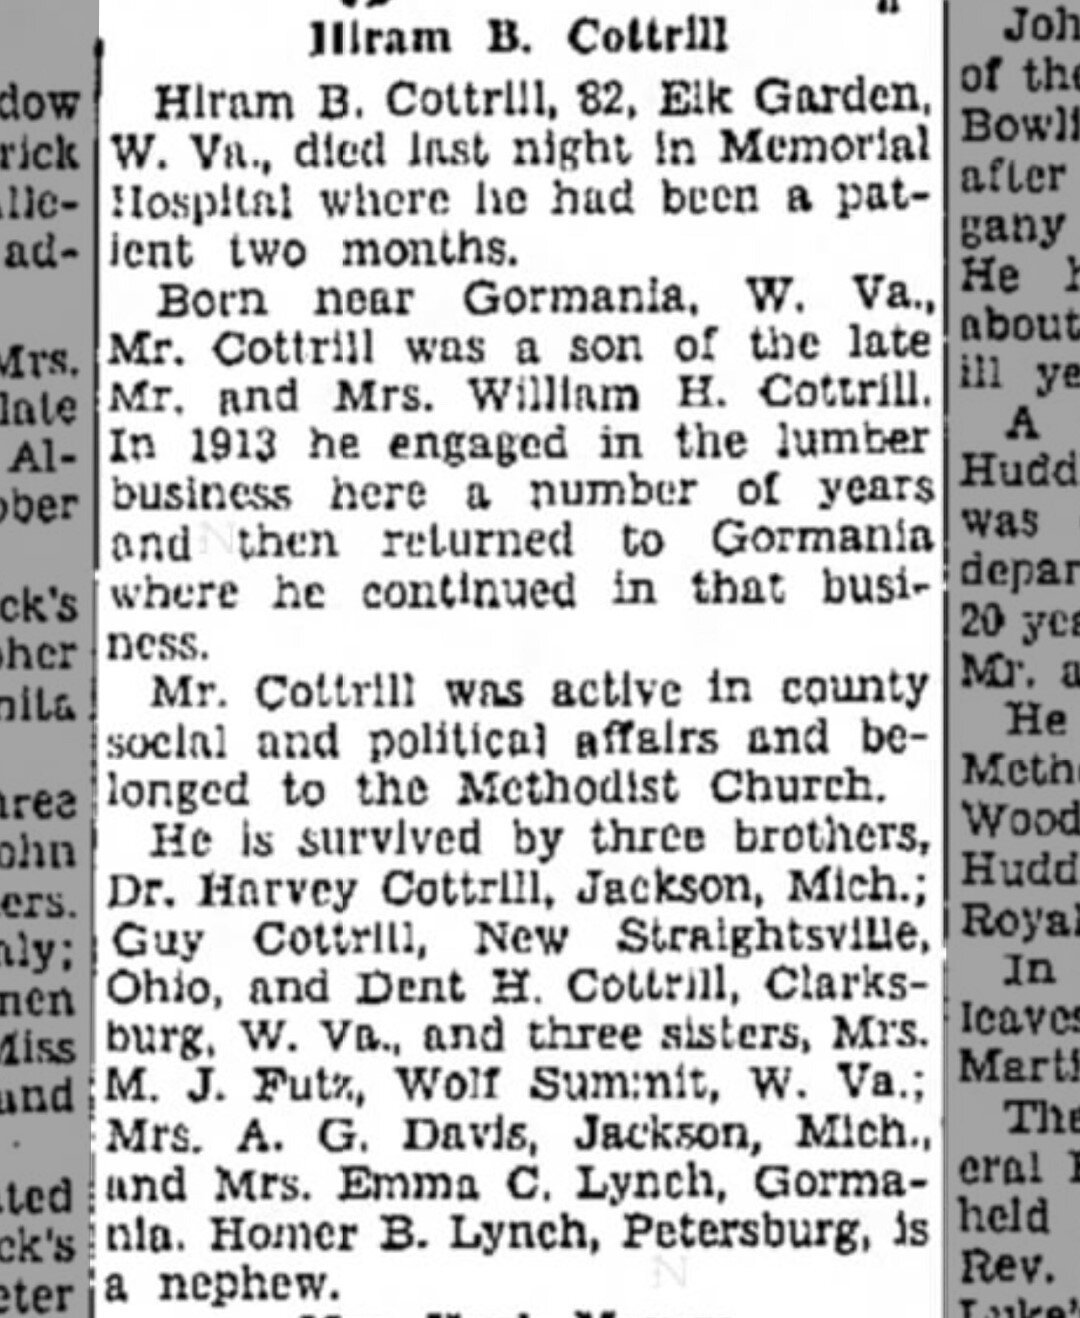 Remembering Hiram Cottrill, who died 73 years ago today. Born to a farming family near Gormania, Cottrill worked as a mine superintendent before building our Opera House. He owned the theatre and saloon for more than a decade. Here, his obituary from